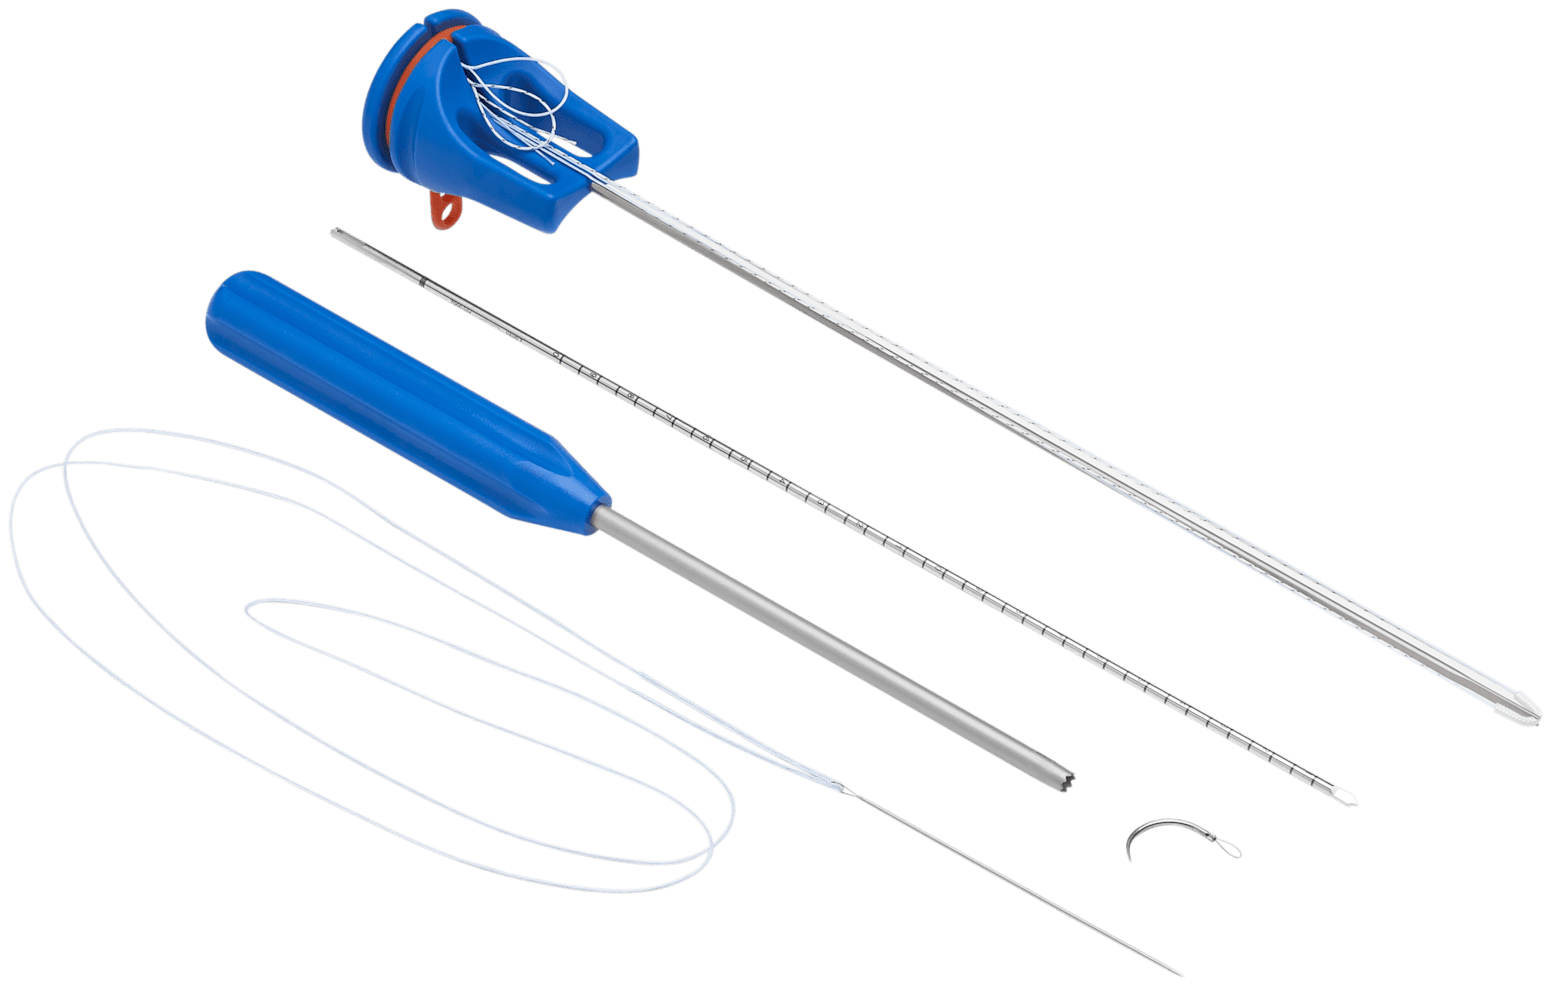 2.6 FiberTak Button Implant System (Includes: FiberTak button w/Inserter and Double Loaded FiberLink, 2.6 mm spade Tip Drill, Drill Guide, #2 FiberLoop Suture, and Free Needle)